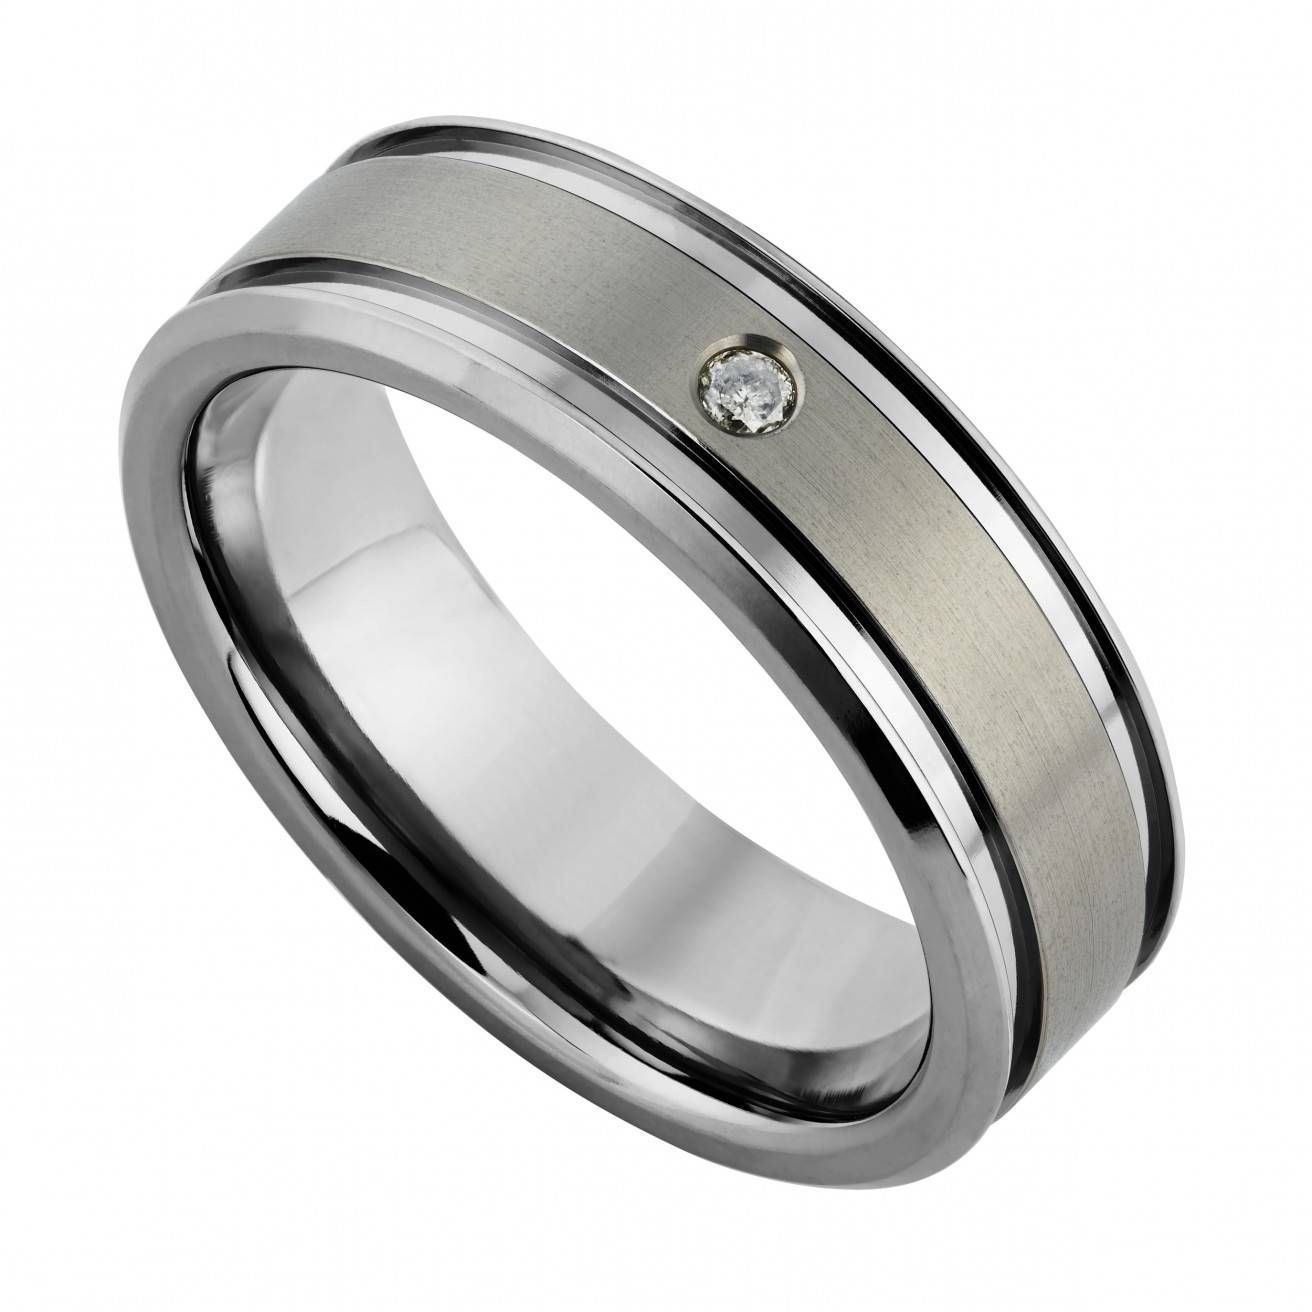 Buy Wedding Rings – Diamond, Platinum, Silver, Gold – Fraser Hart For Contemporary Mens Wedding Rings (View 12 of 15)